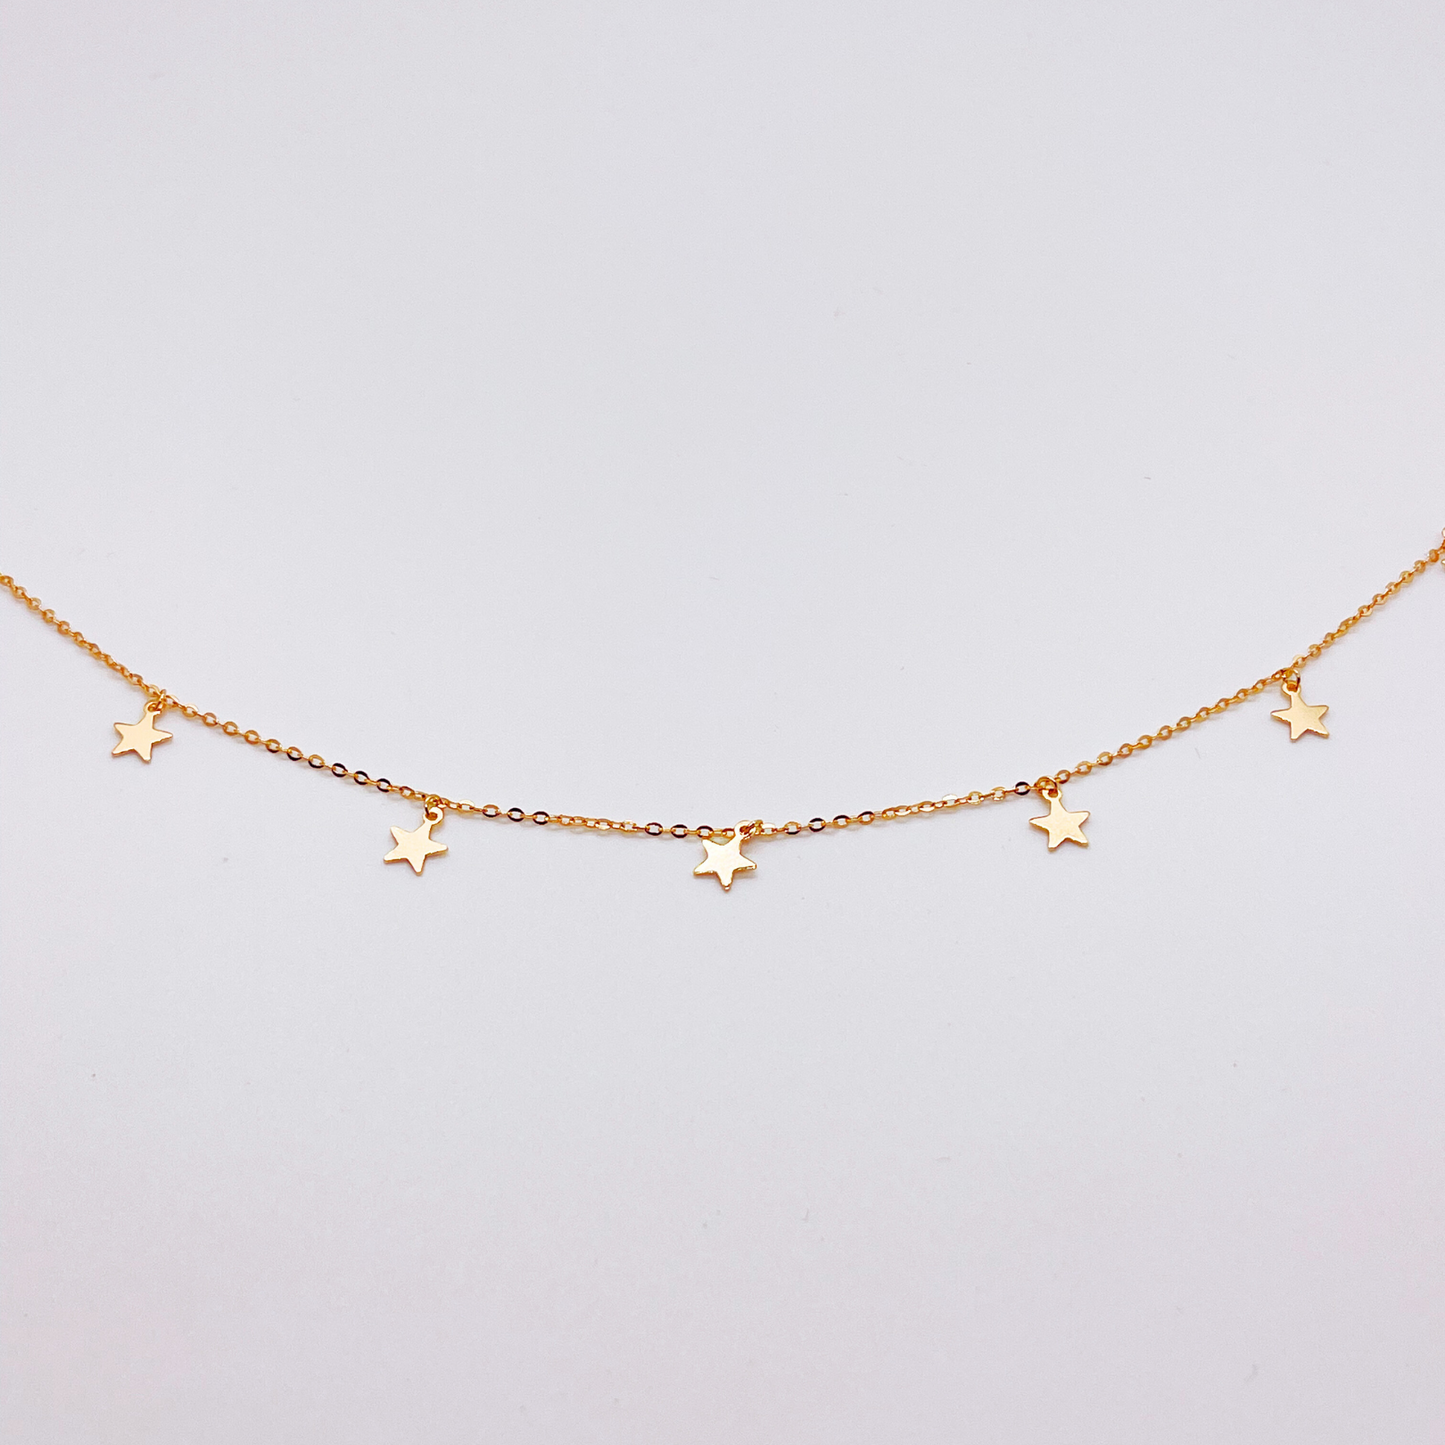 Gold anklet with star charms on a white background